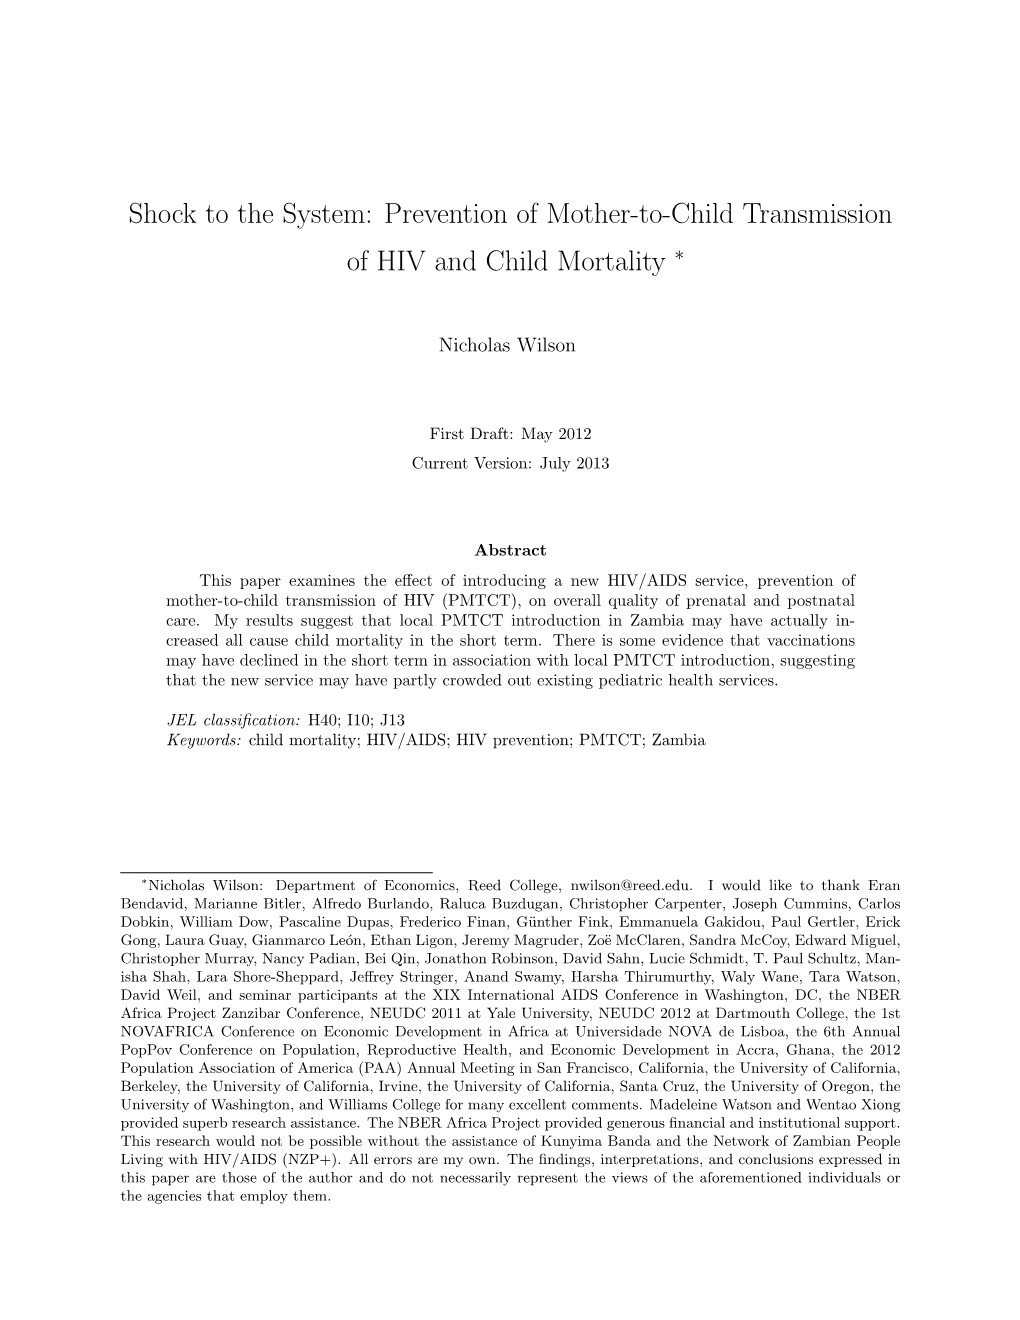 Shock to the System: Prevention of Mother-To-Child Transmission of HIV and Child Mortality ∗